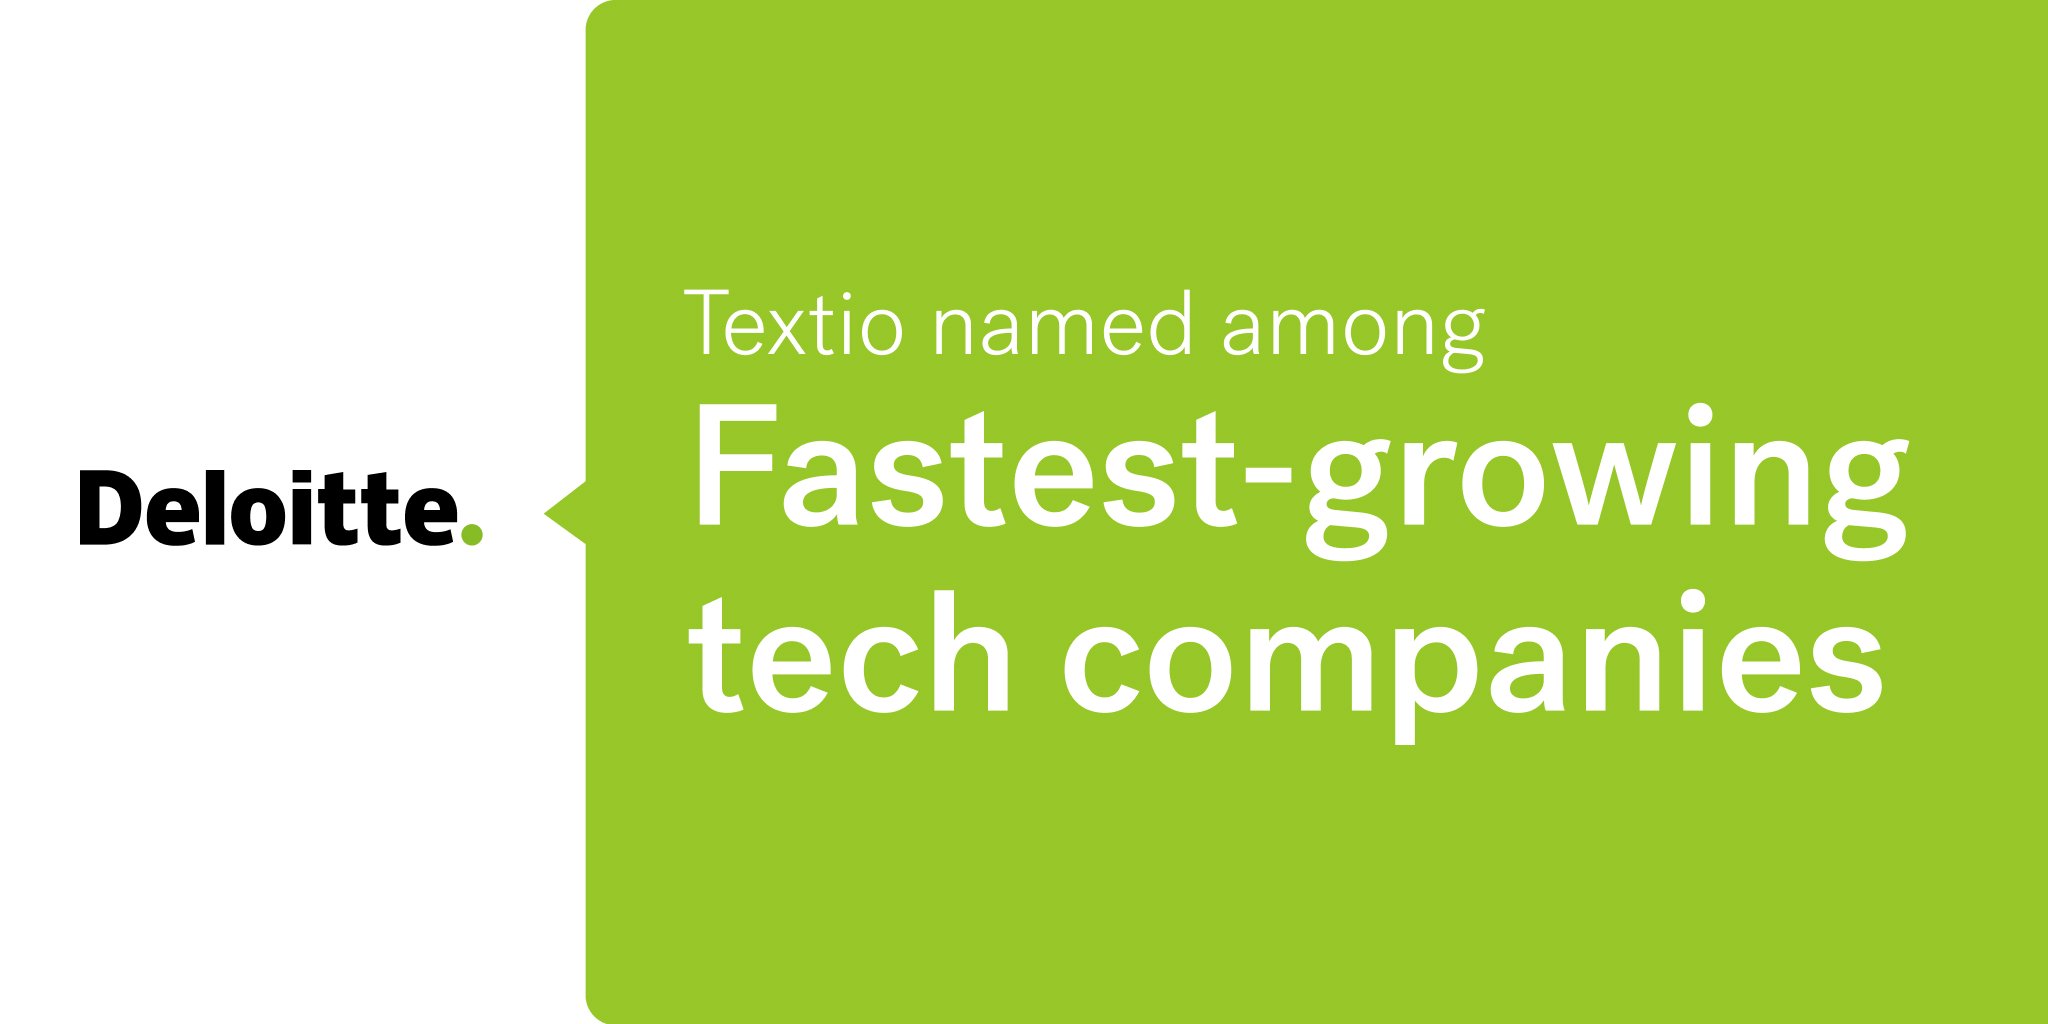 Graphic of Deloitte logo on left with speech bubble on right that reads "Textio named among Fastest-growing tech companies"